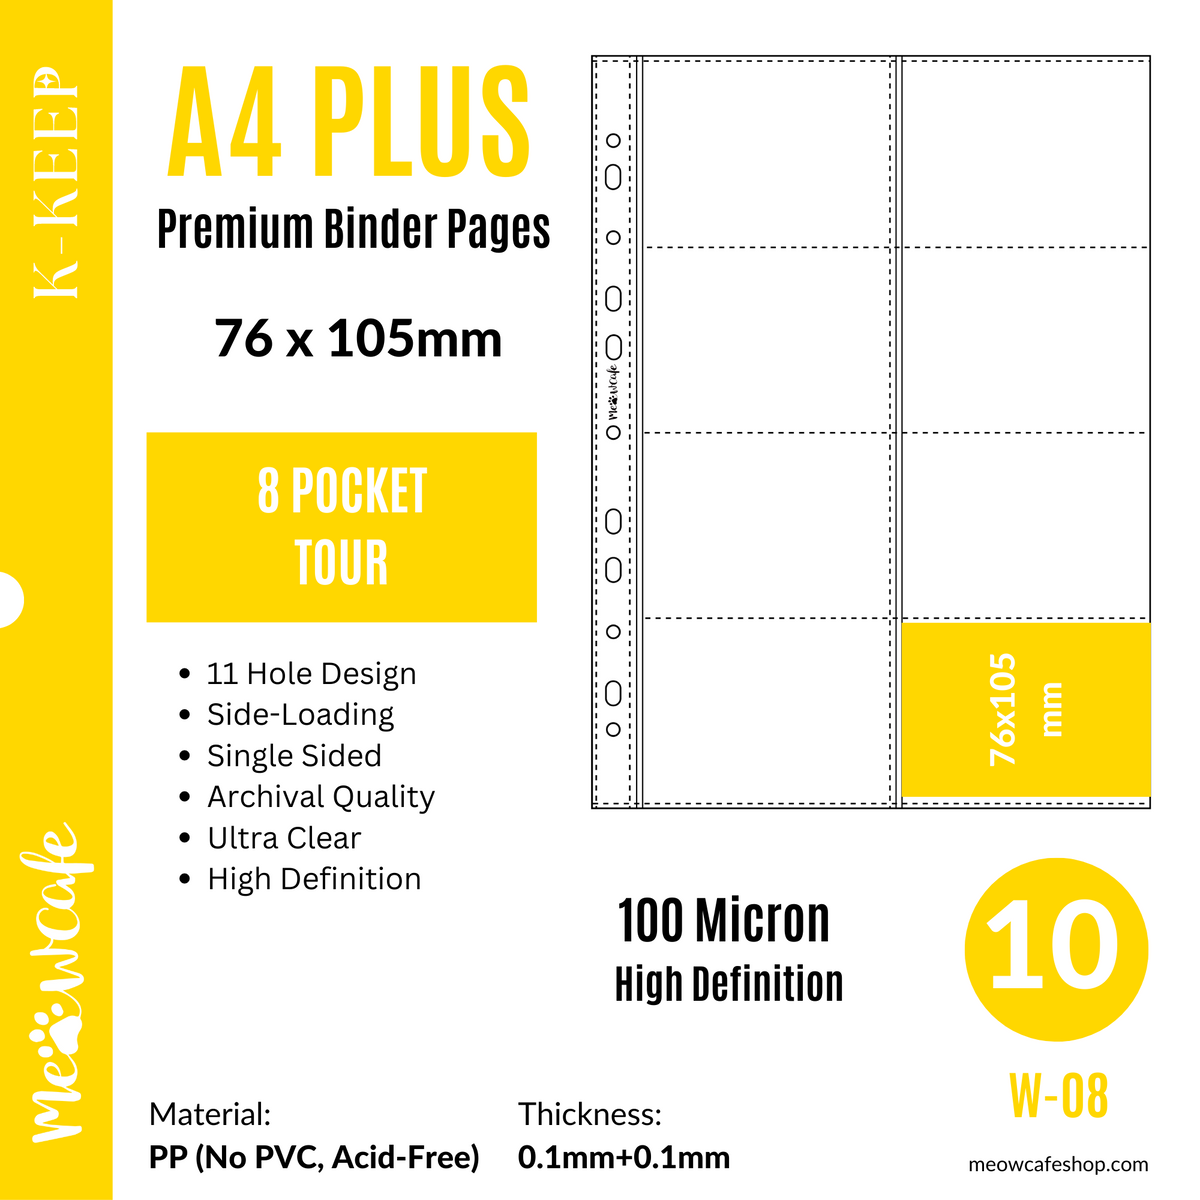 K-KEEP [A4 PLUS] -  8 Pocket Tour - 11 Holes Premium Binder Pages, 100 Micron Thick, High Definition (Pack of 10) - (W-08)